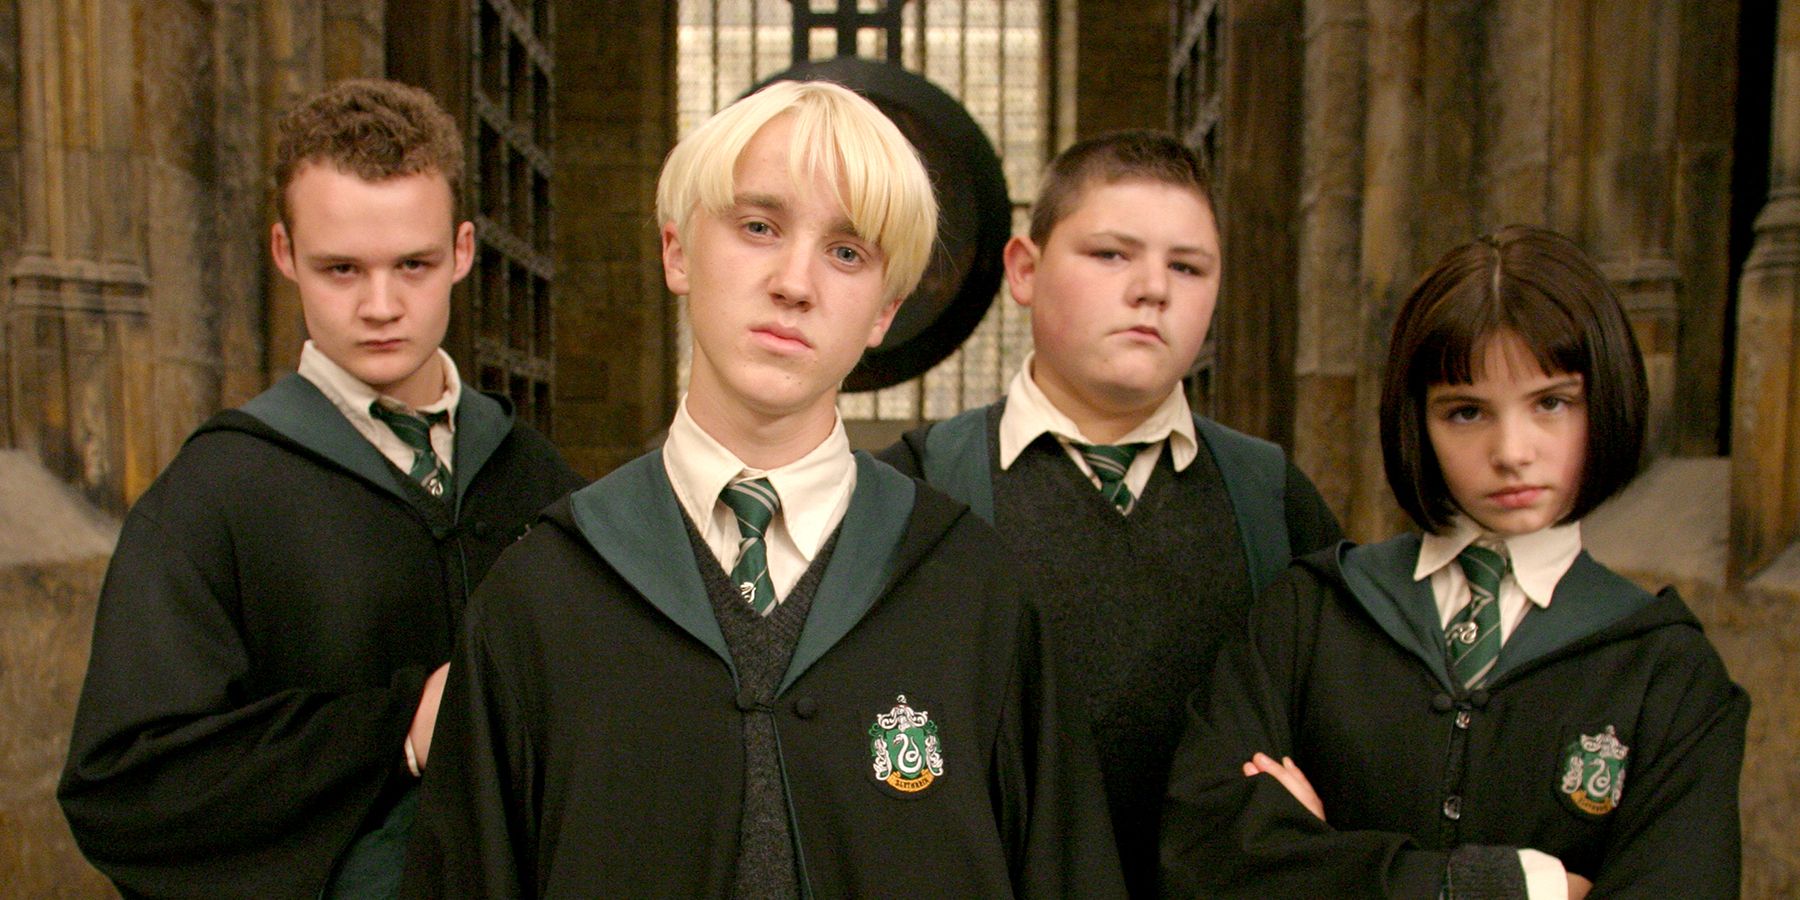 Draco and House Slytherin from Harry Potter of the Prisoner of Azkaban